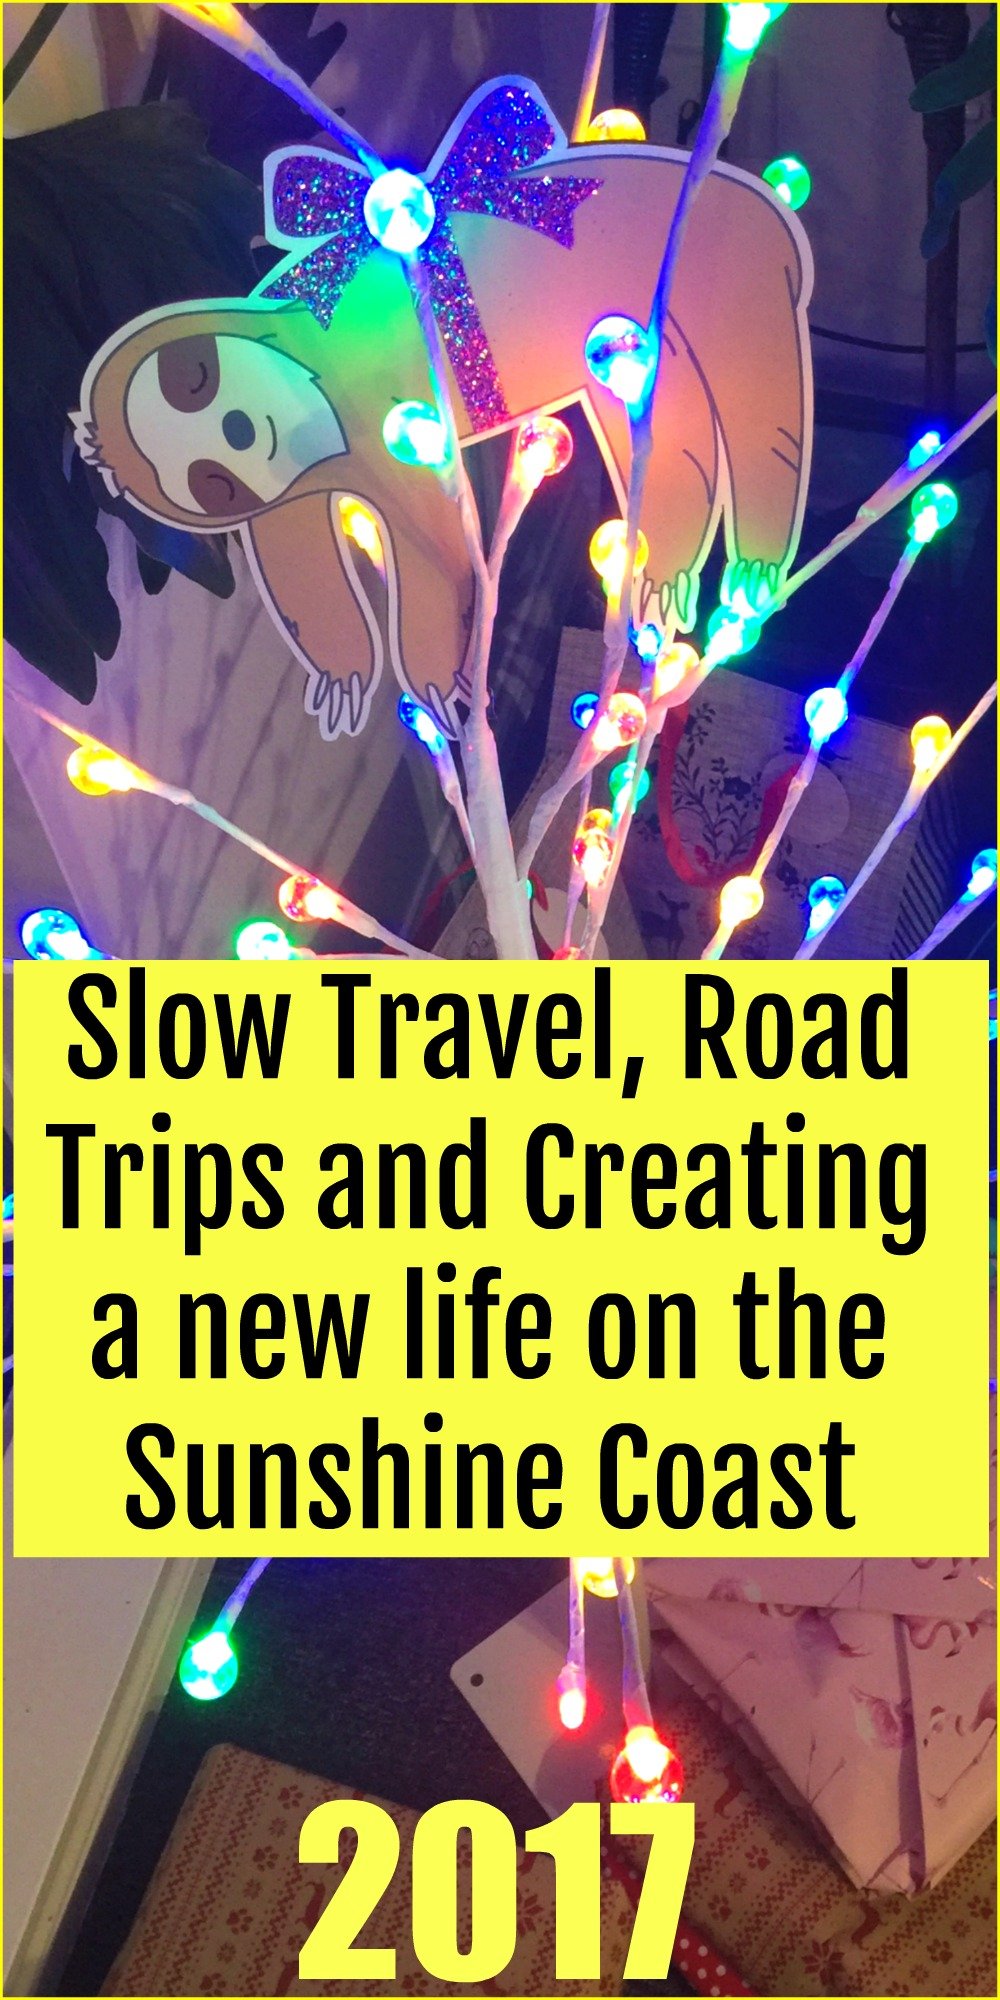 Slow Travel, Road Trips and Creating a new life on the Sunshine Coast